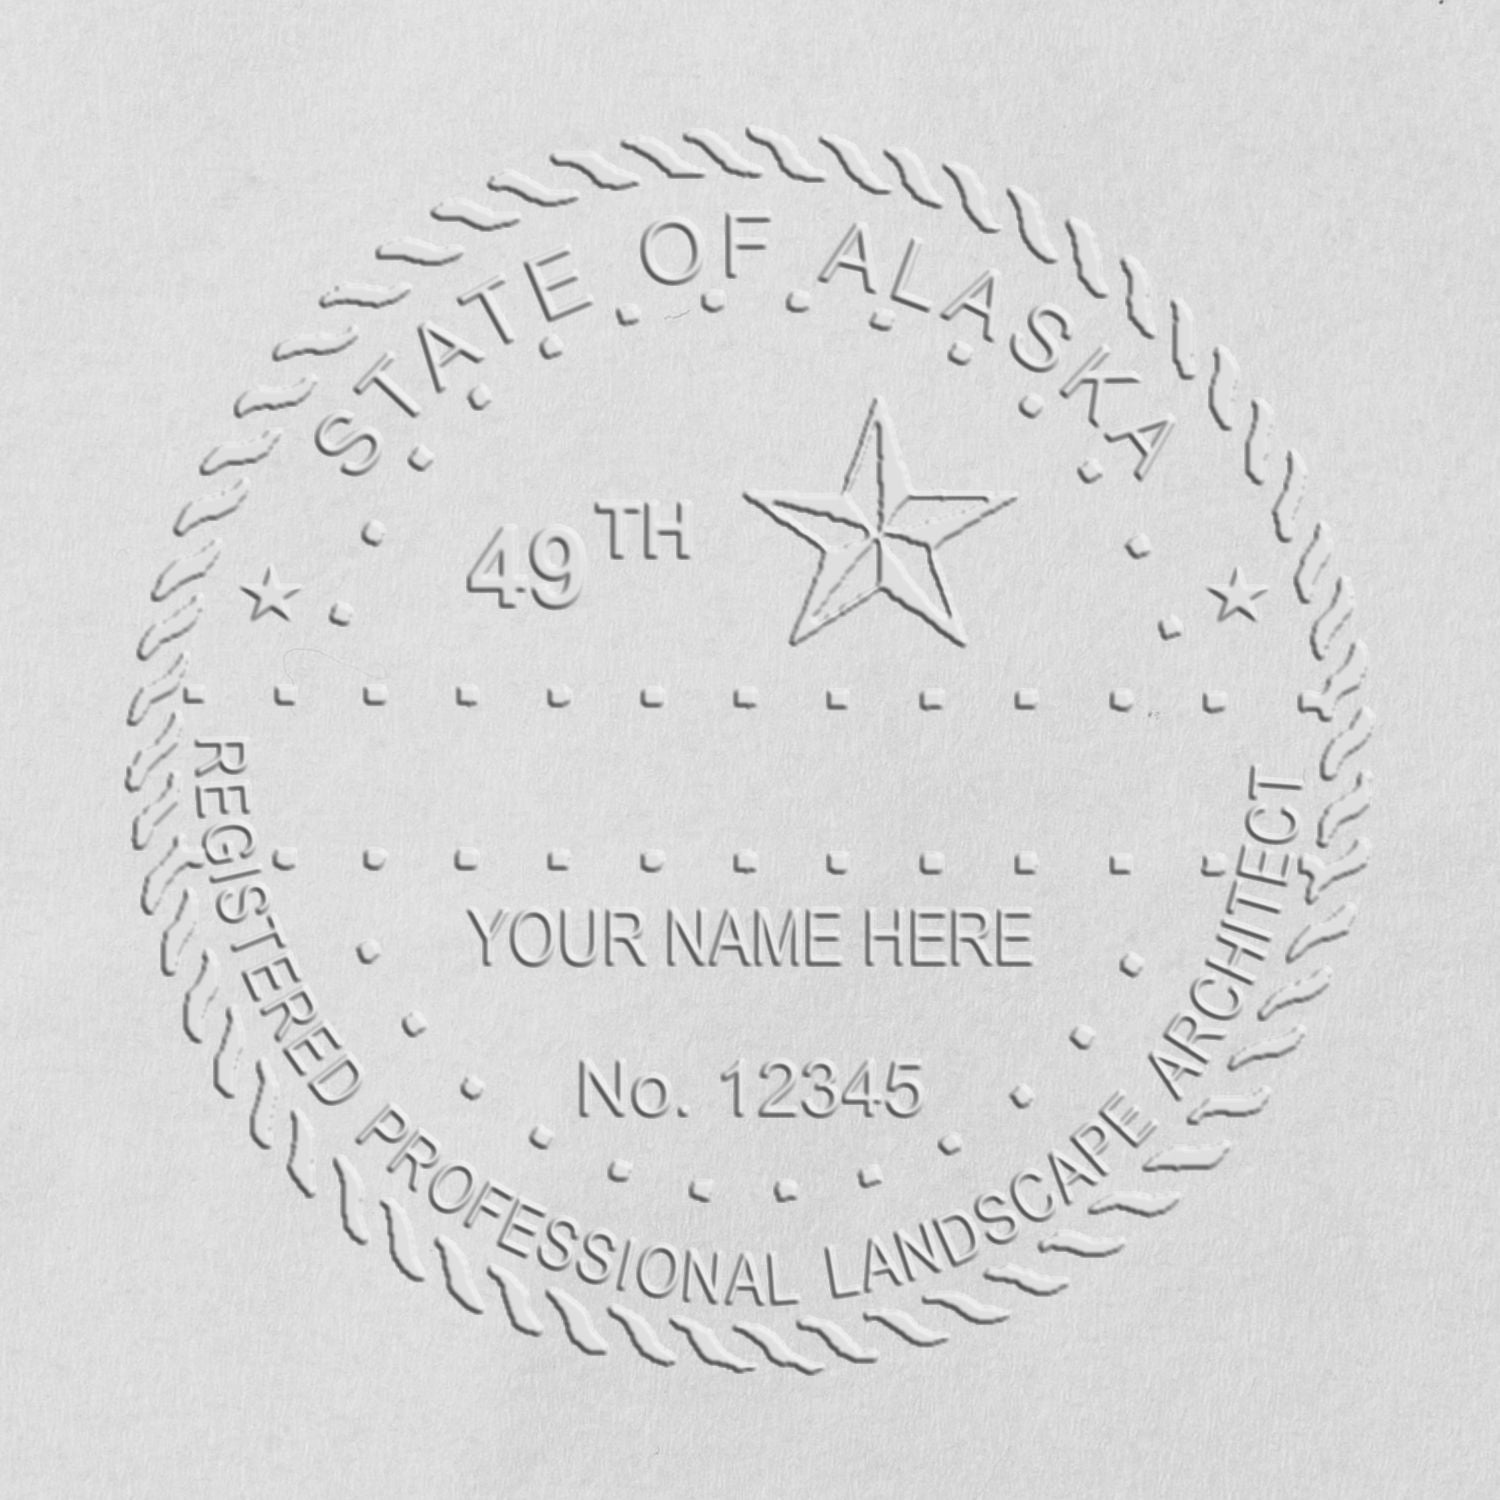 A photograph of the Hybrid Alaska Landscape Architect Seal stamp impression reveals a vivid, professional image of the on paper.